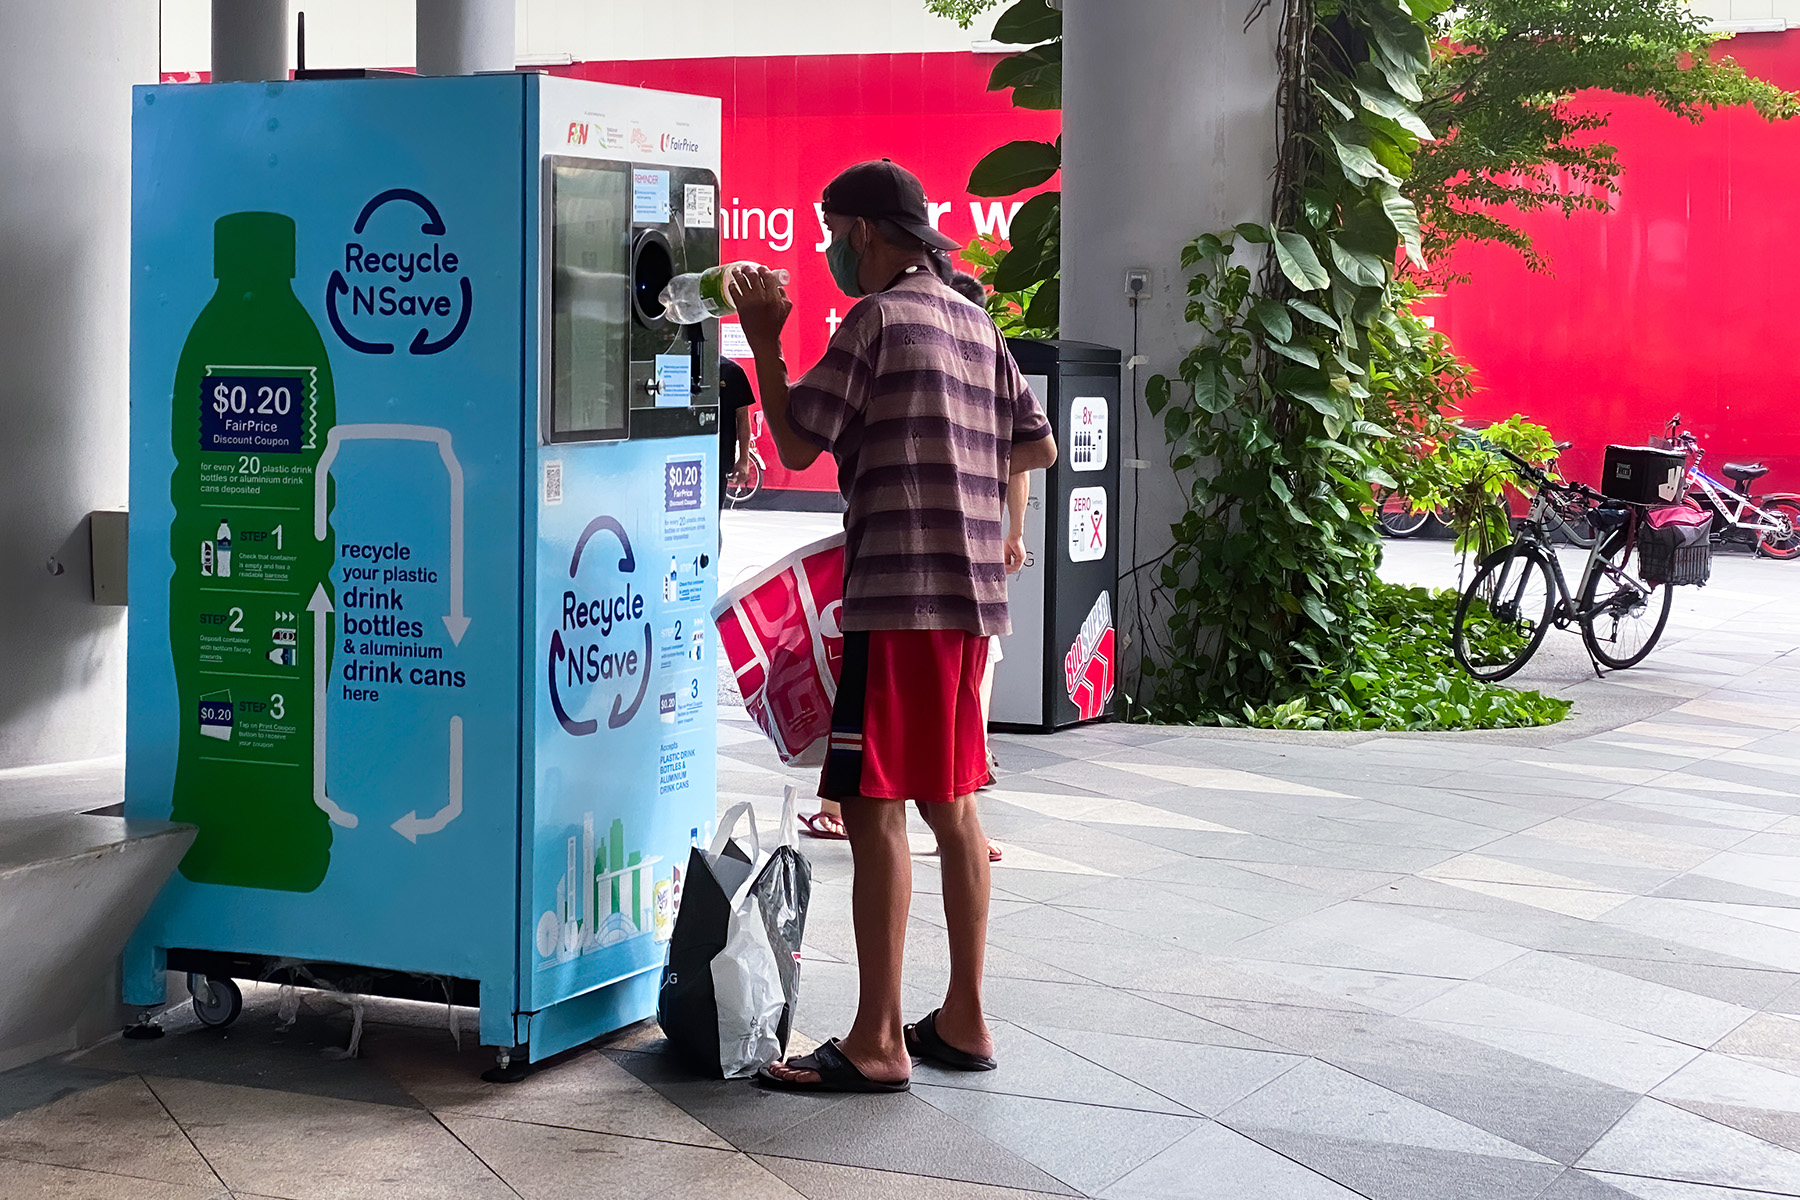 Man recycling plastic bottle in a reverse vending machine in exchange for money.